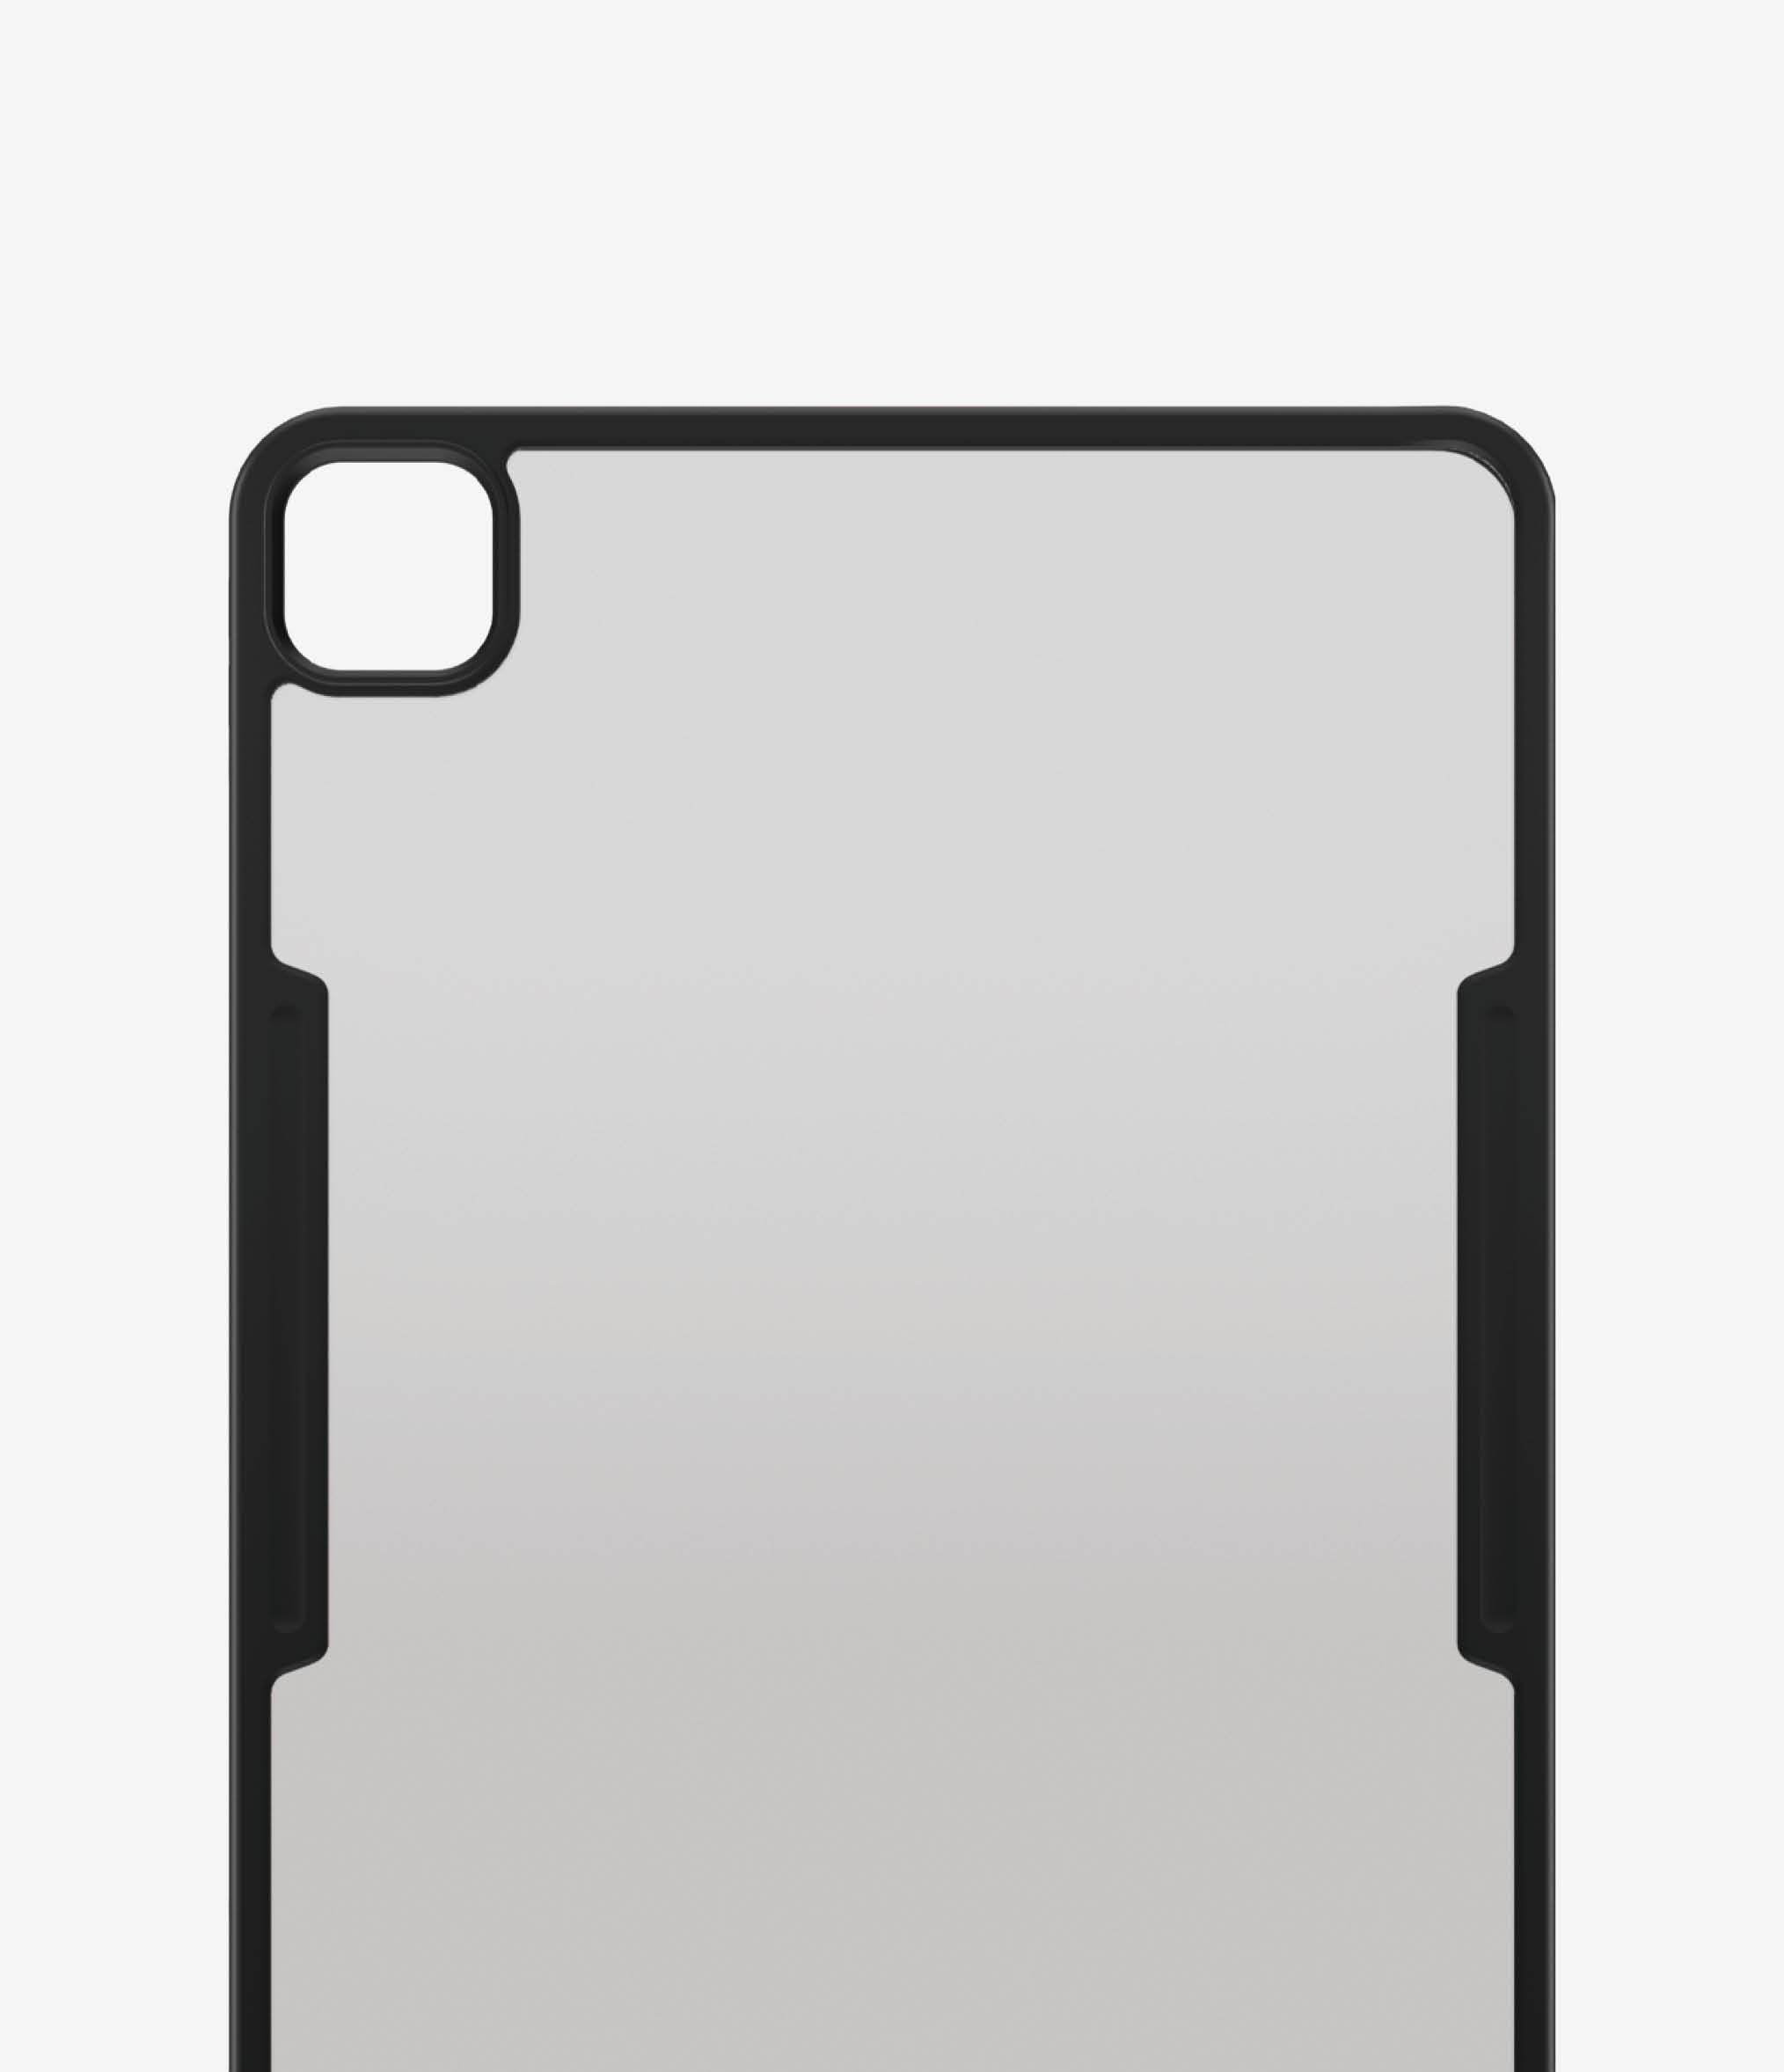 PanzerGlass Clear Case for iPad - Black